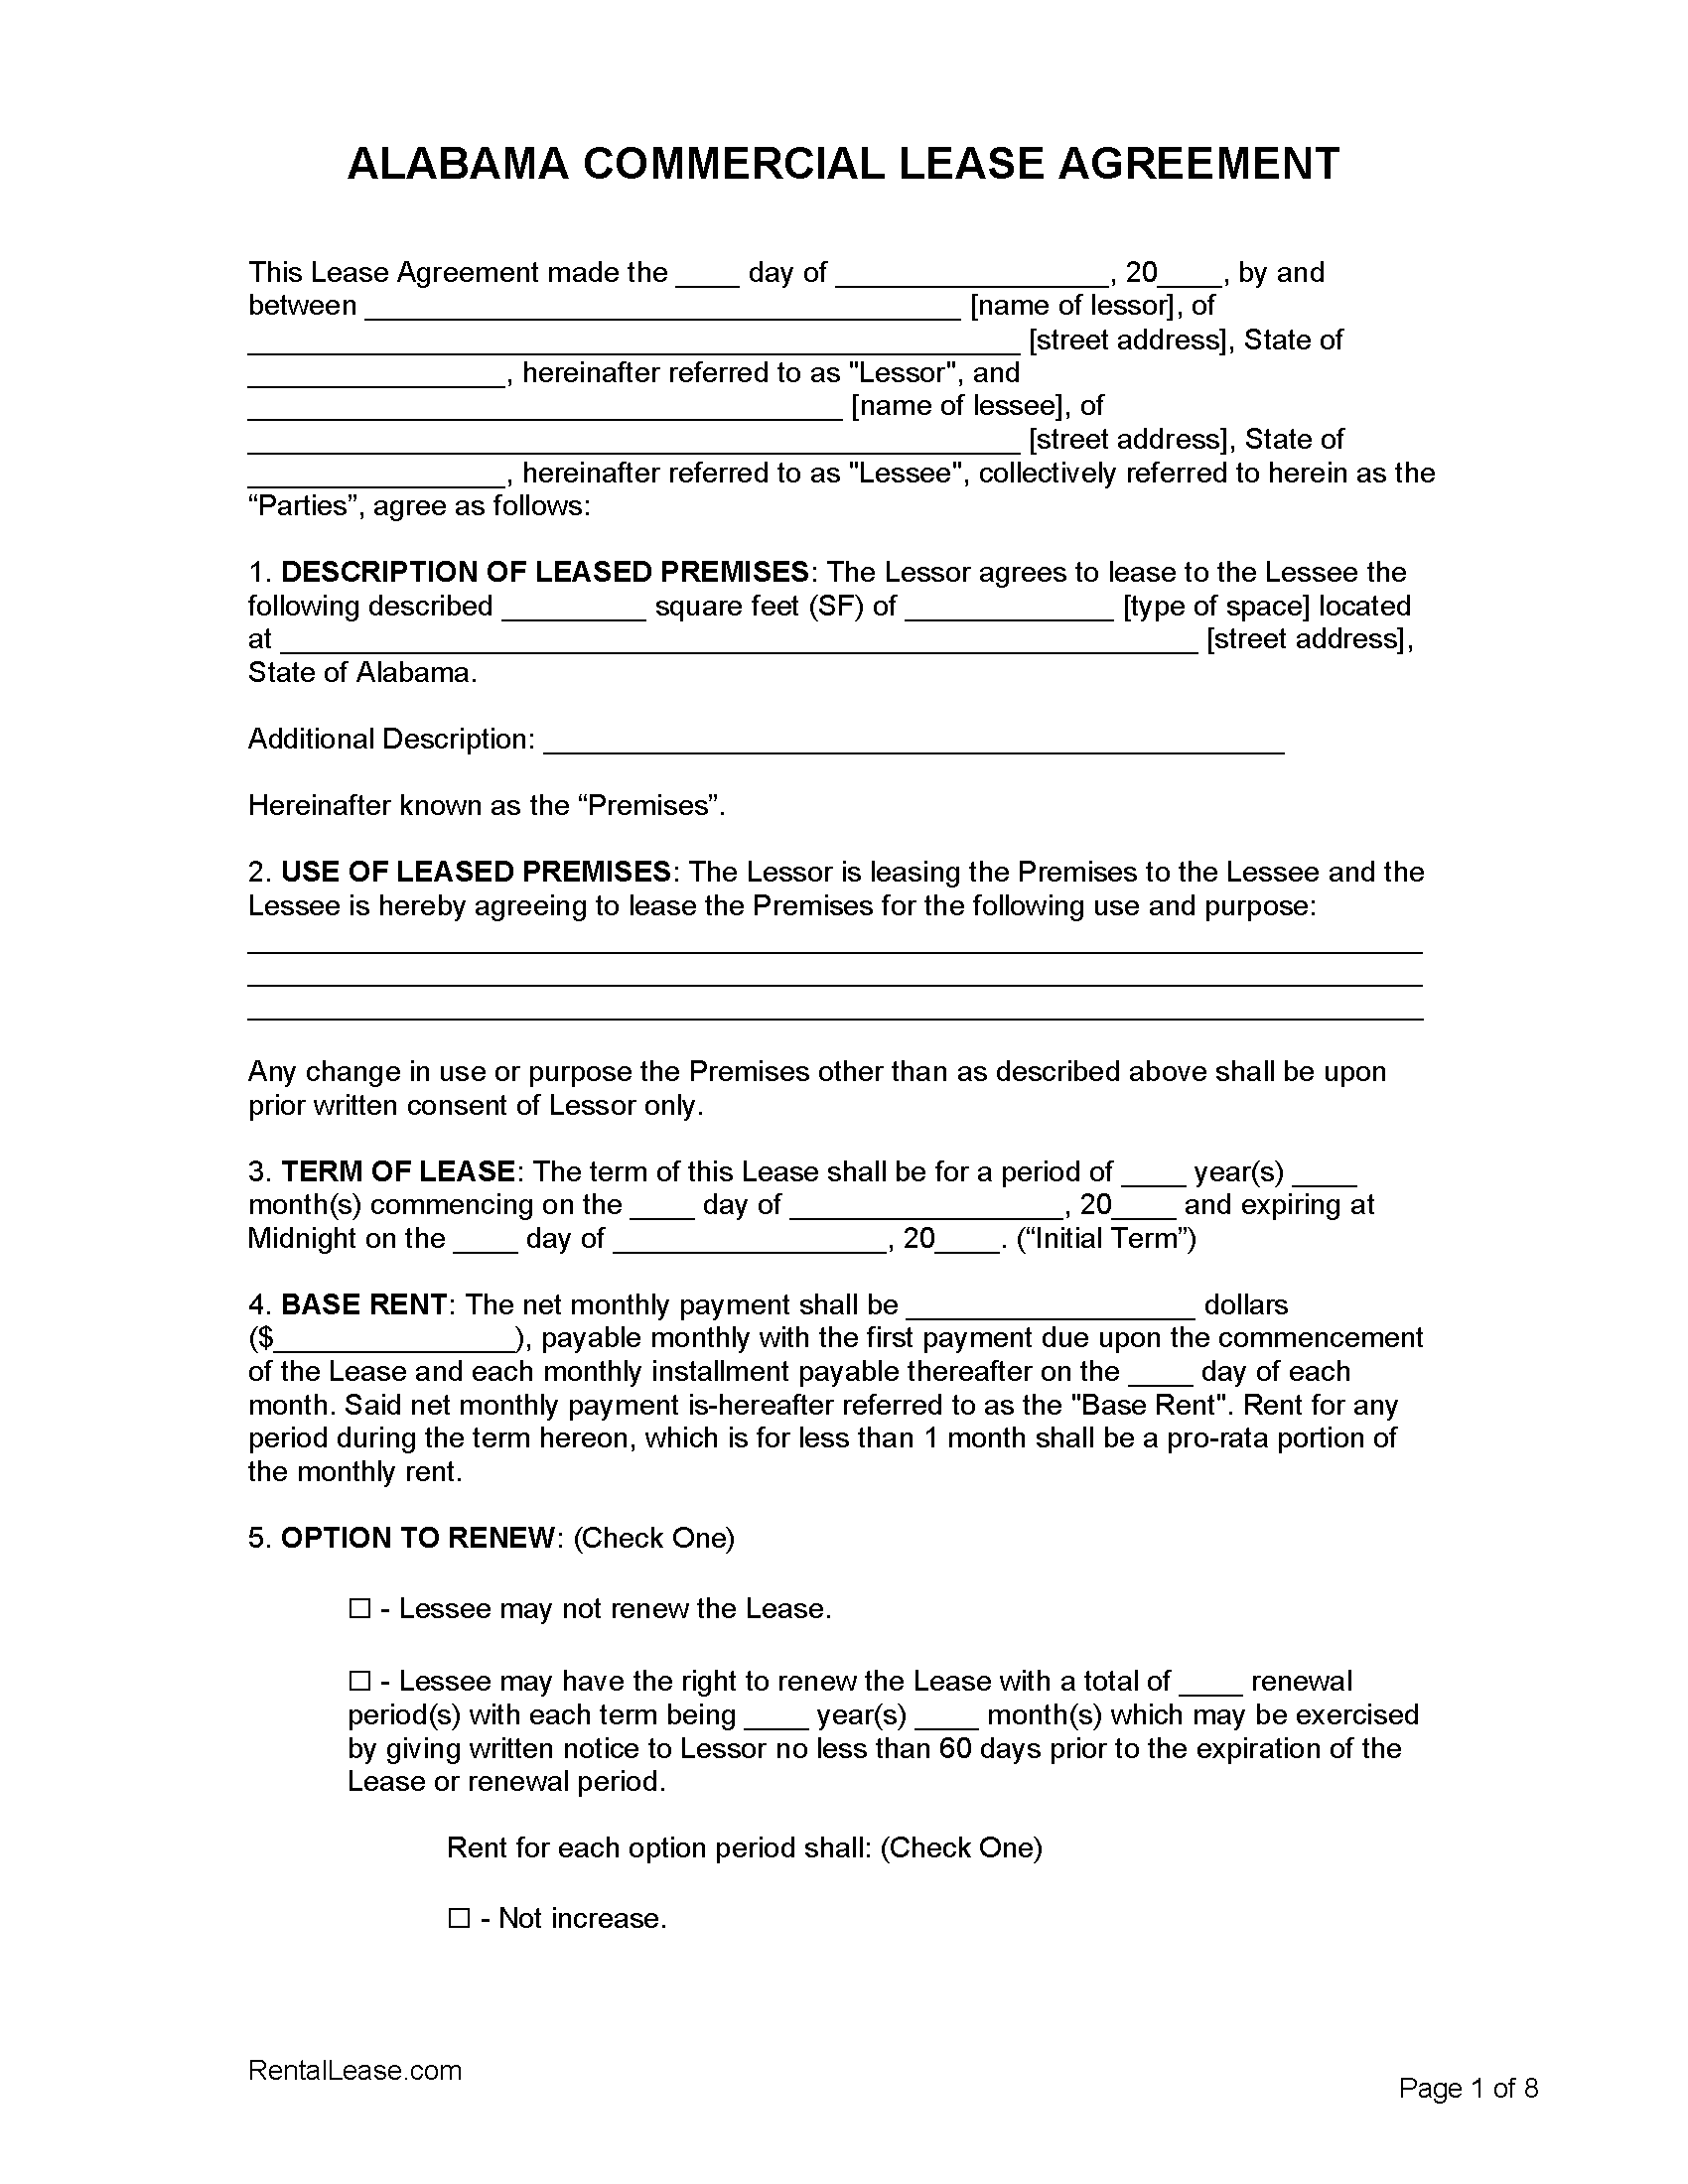 free-alabama-commercial-lease-agreement-pdf-word